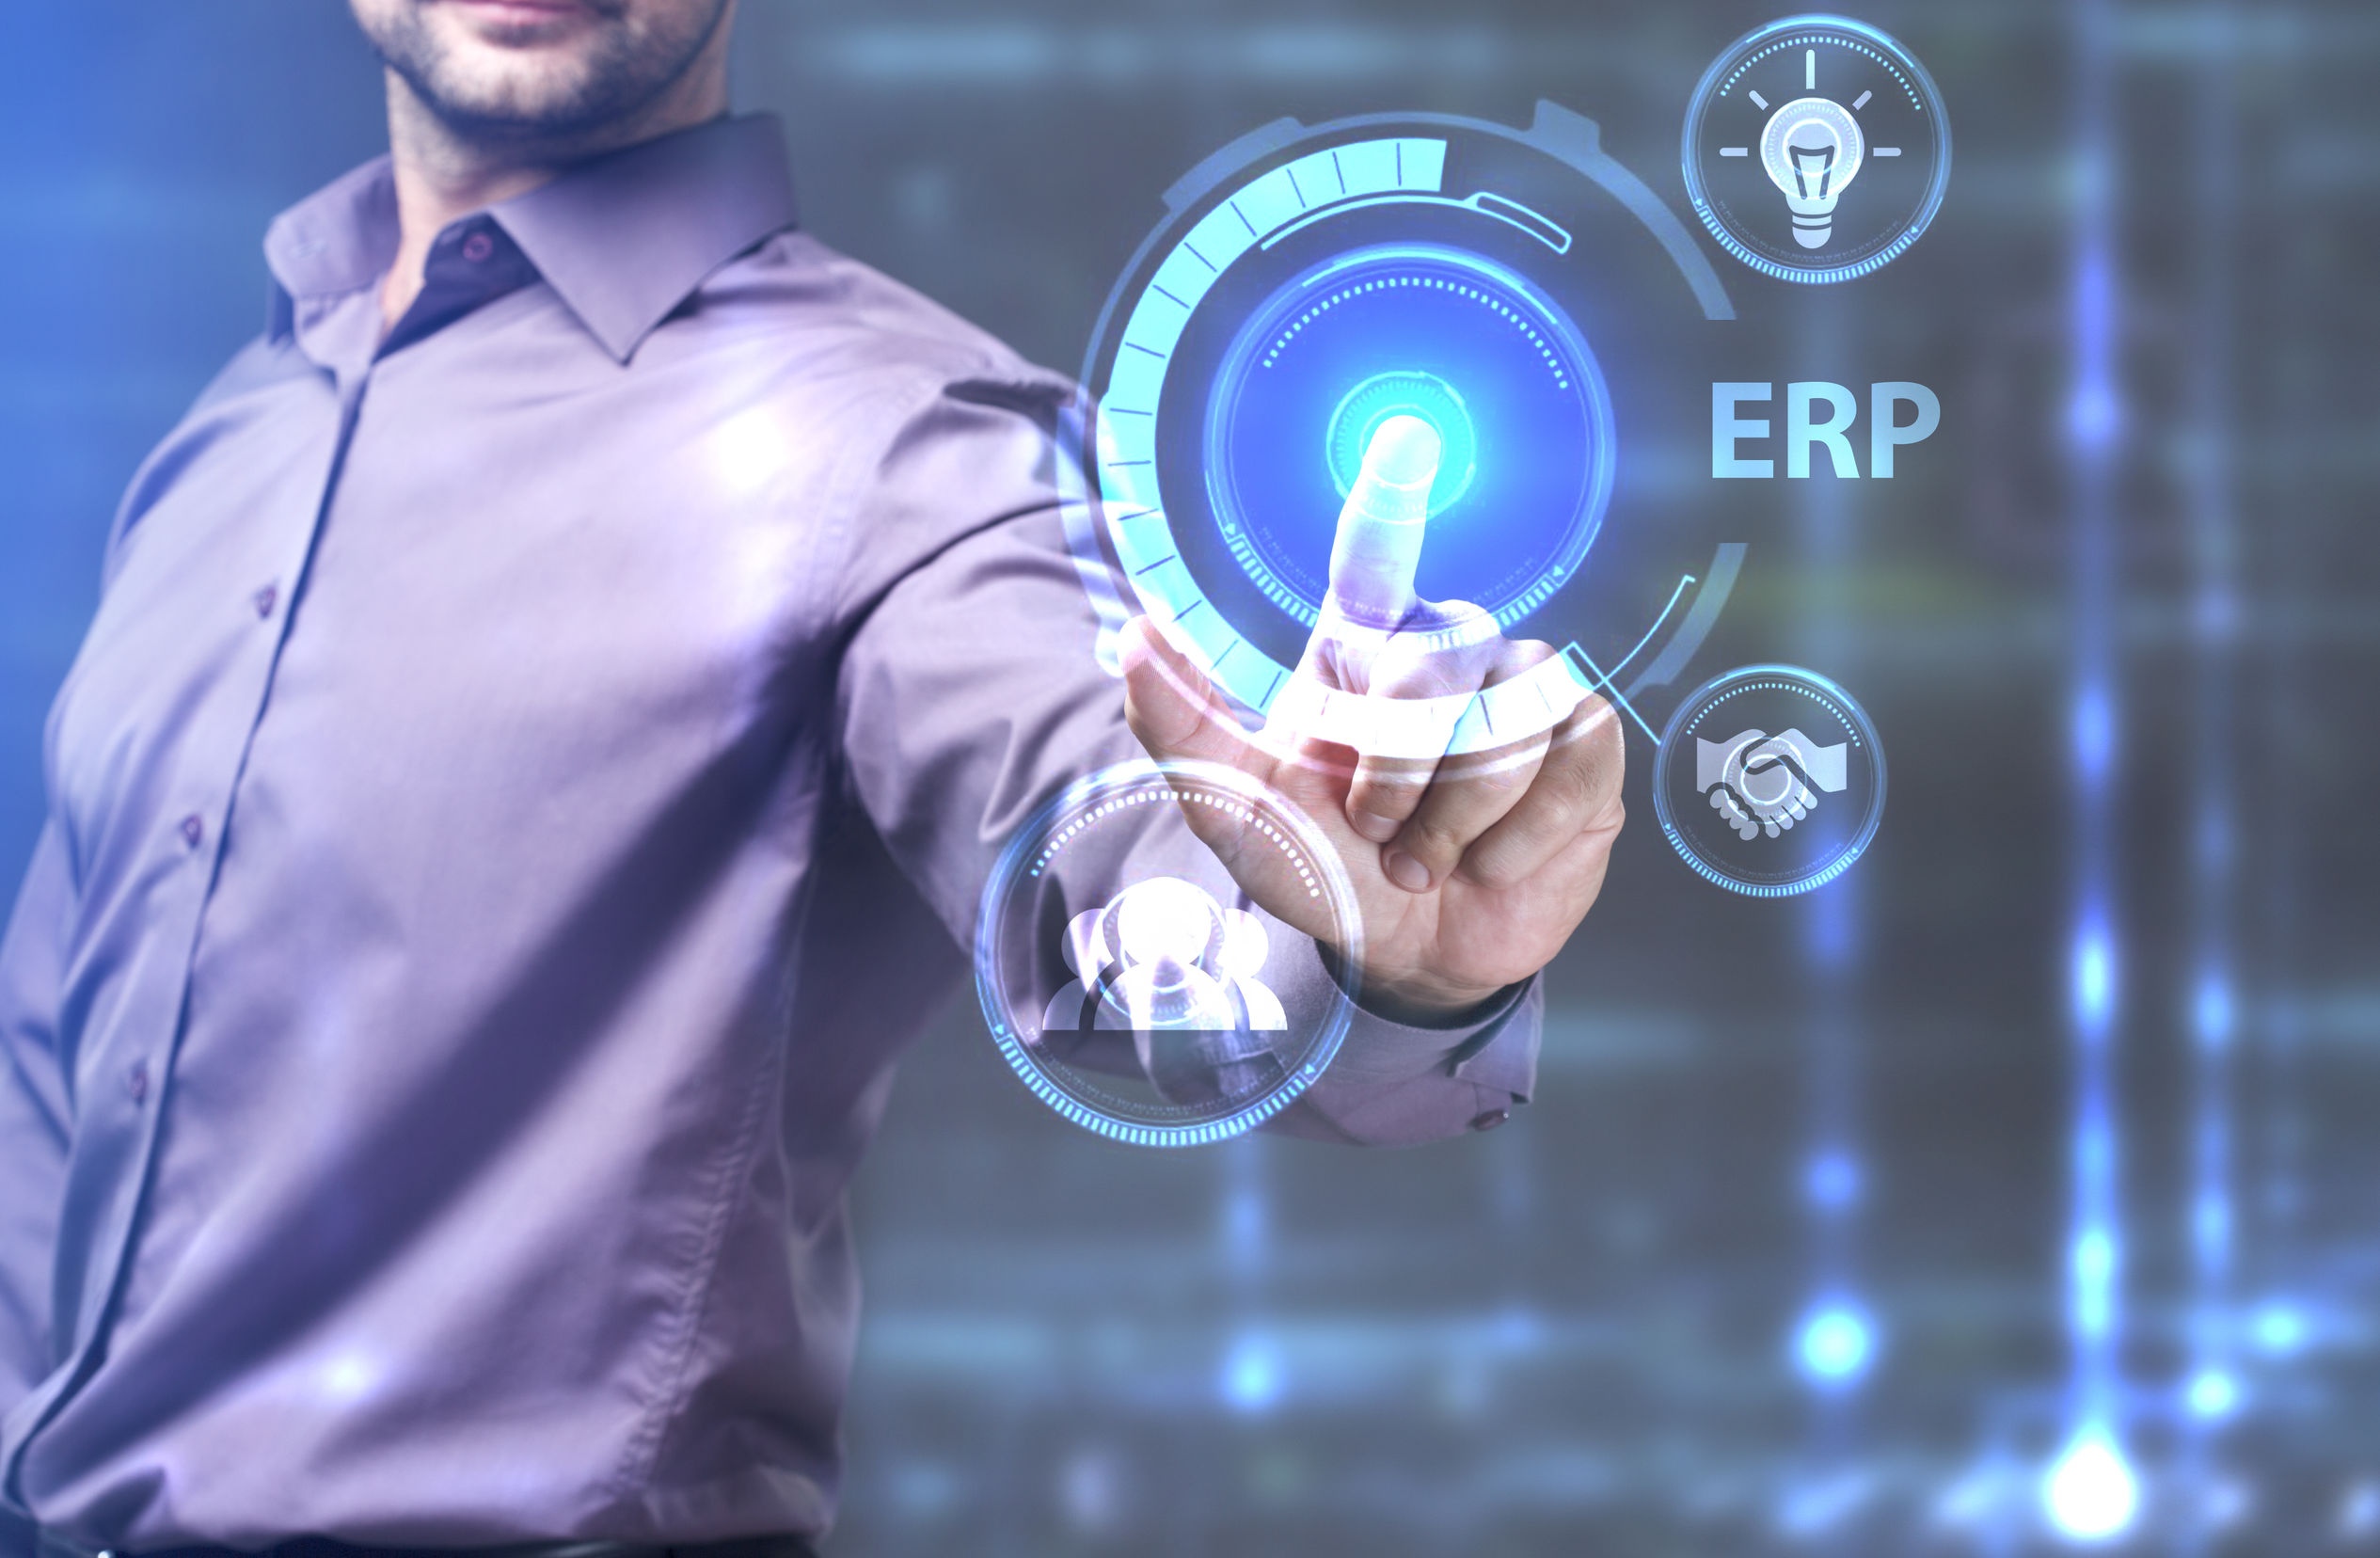 What Is At The Heart Of Any ERP System?